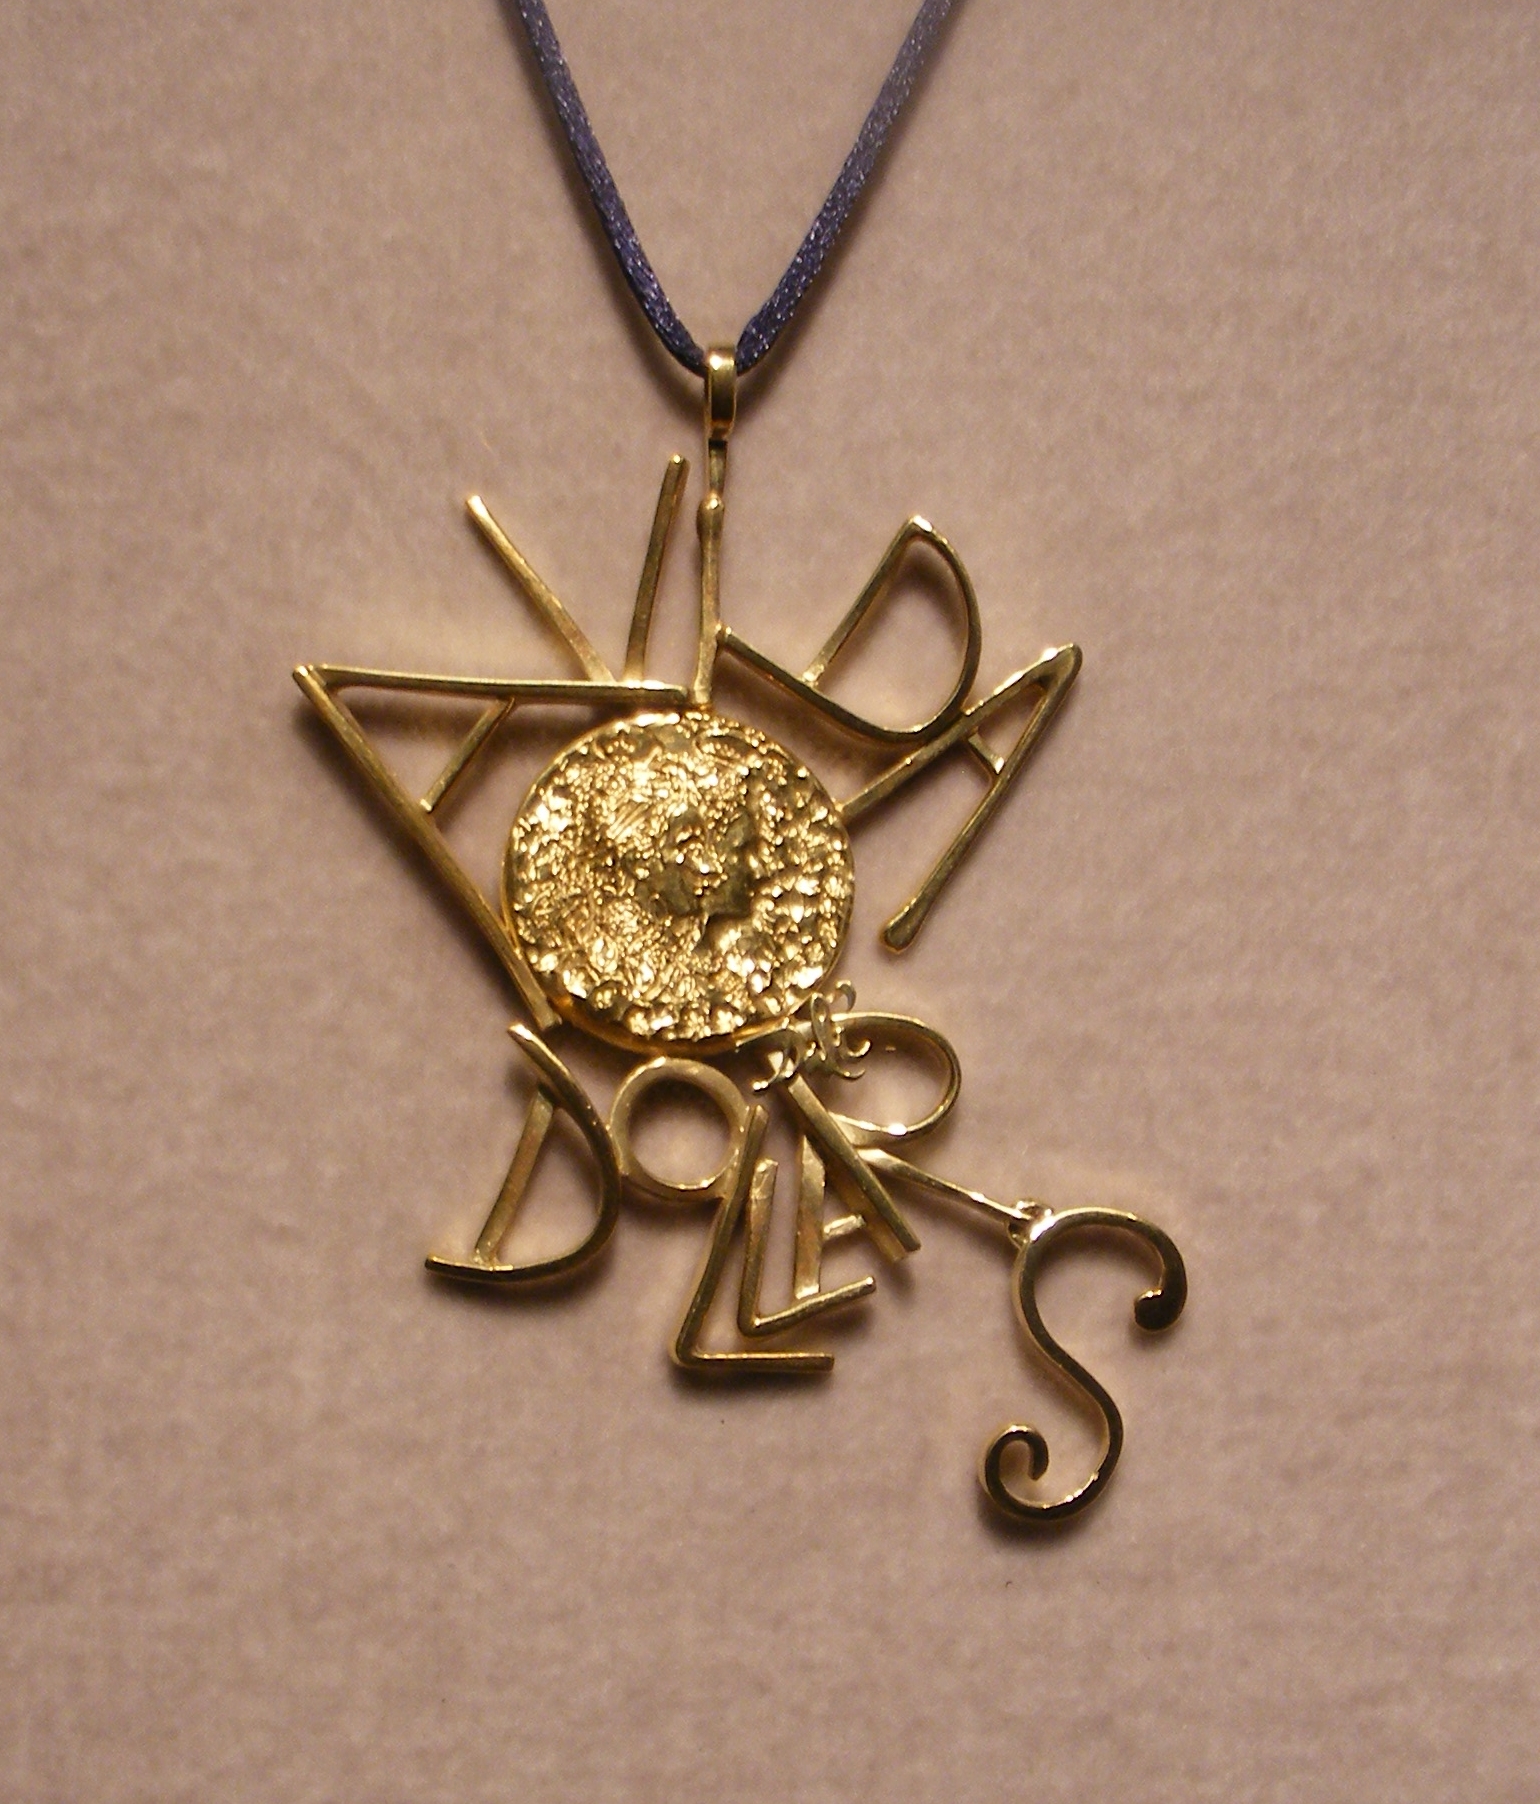 an ornate bronze pendant has an ornament hanging from it